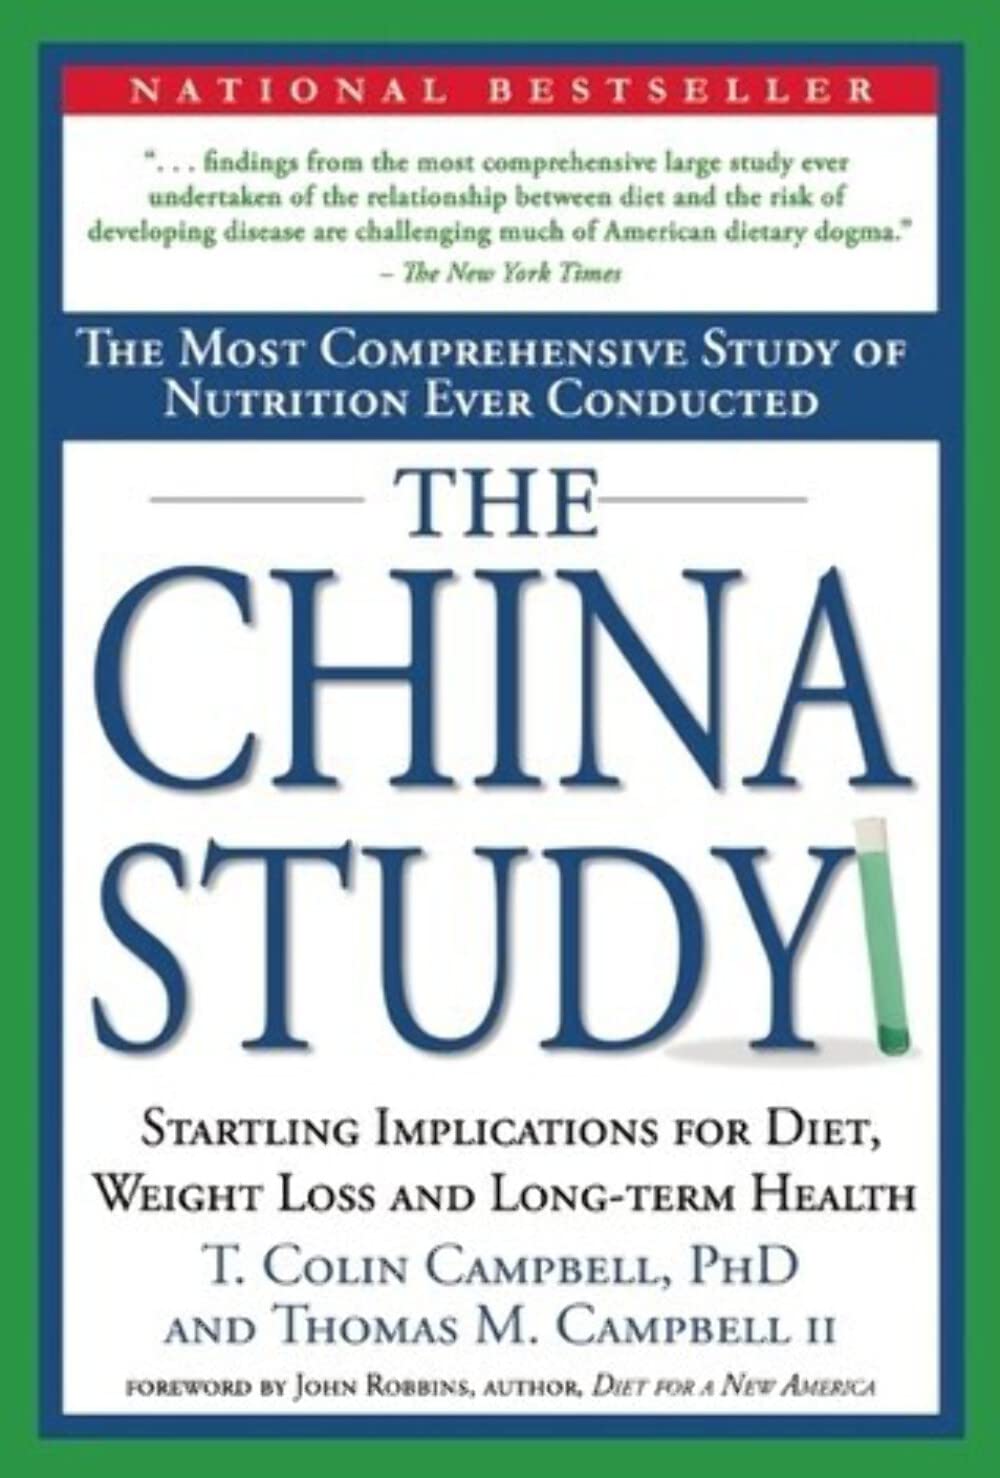 The China Study Hardcover book